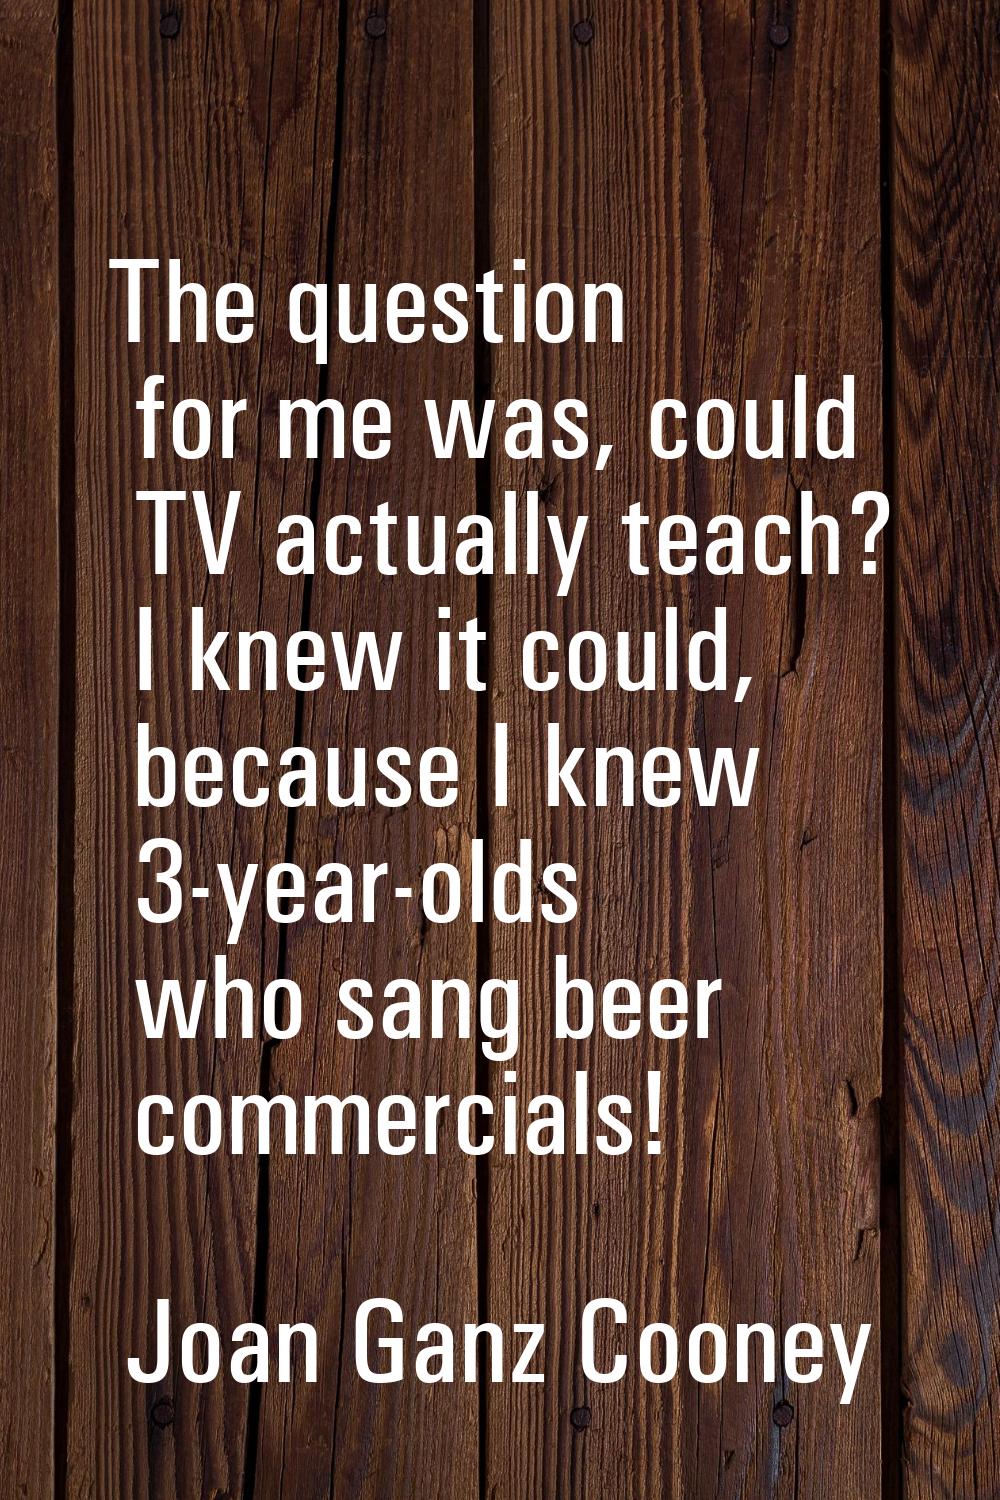 The question for me was, could TV actually teach? I knew it could, because I knew 3-year-olds who s